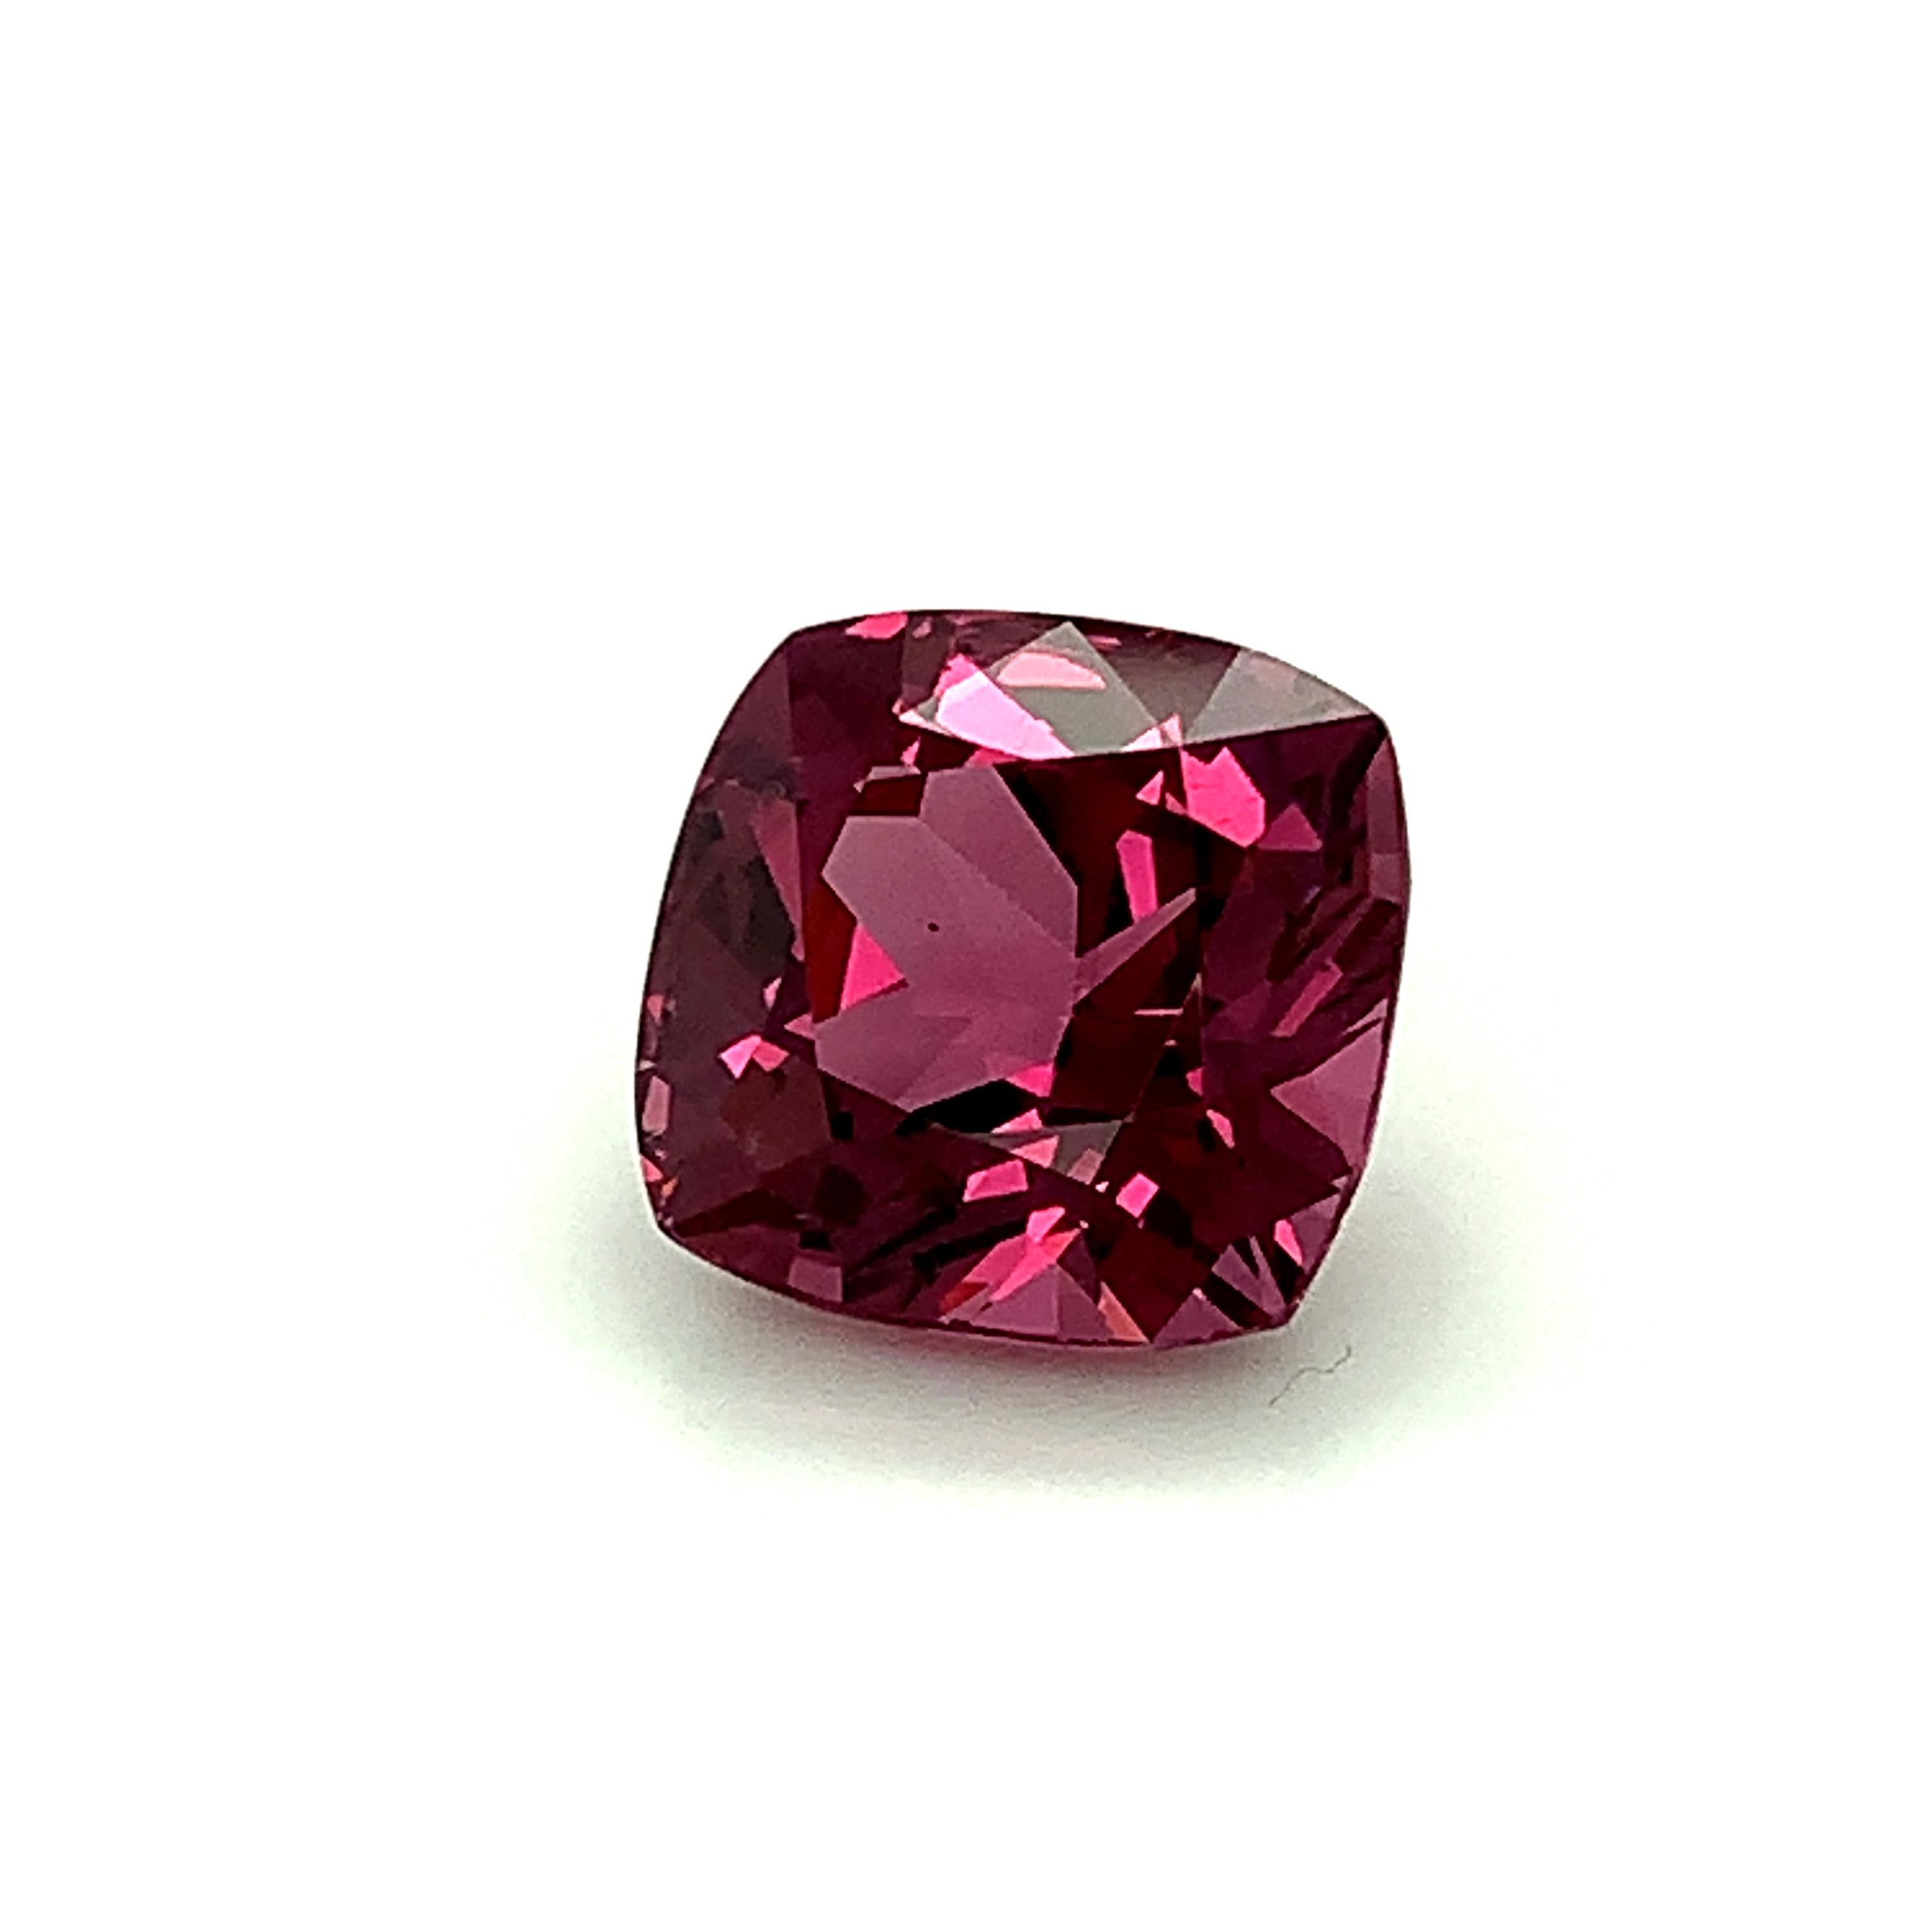 Unheated 9.26 Carat Purple Pink Spinel Cushion, Loose Gemstone, GIA Certified .A For Sale 3